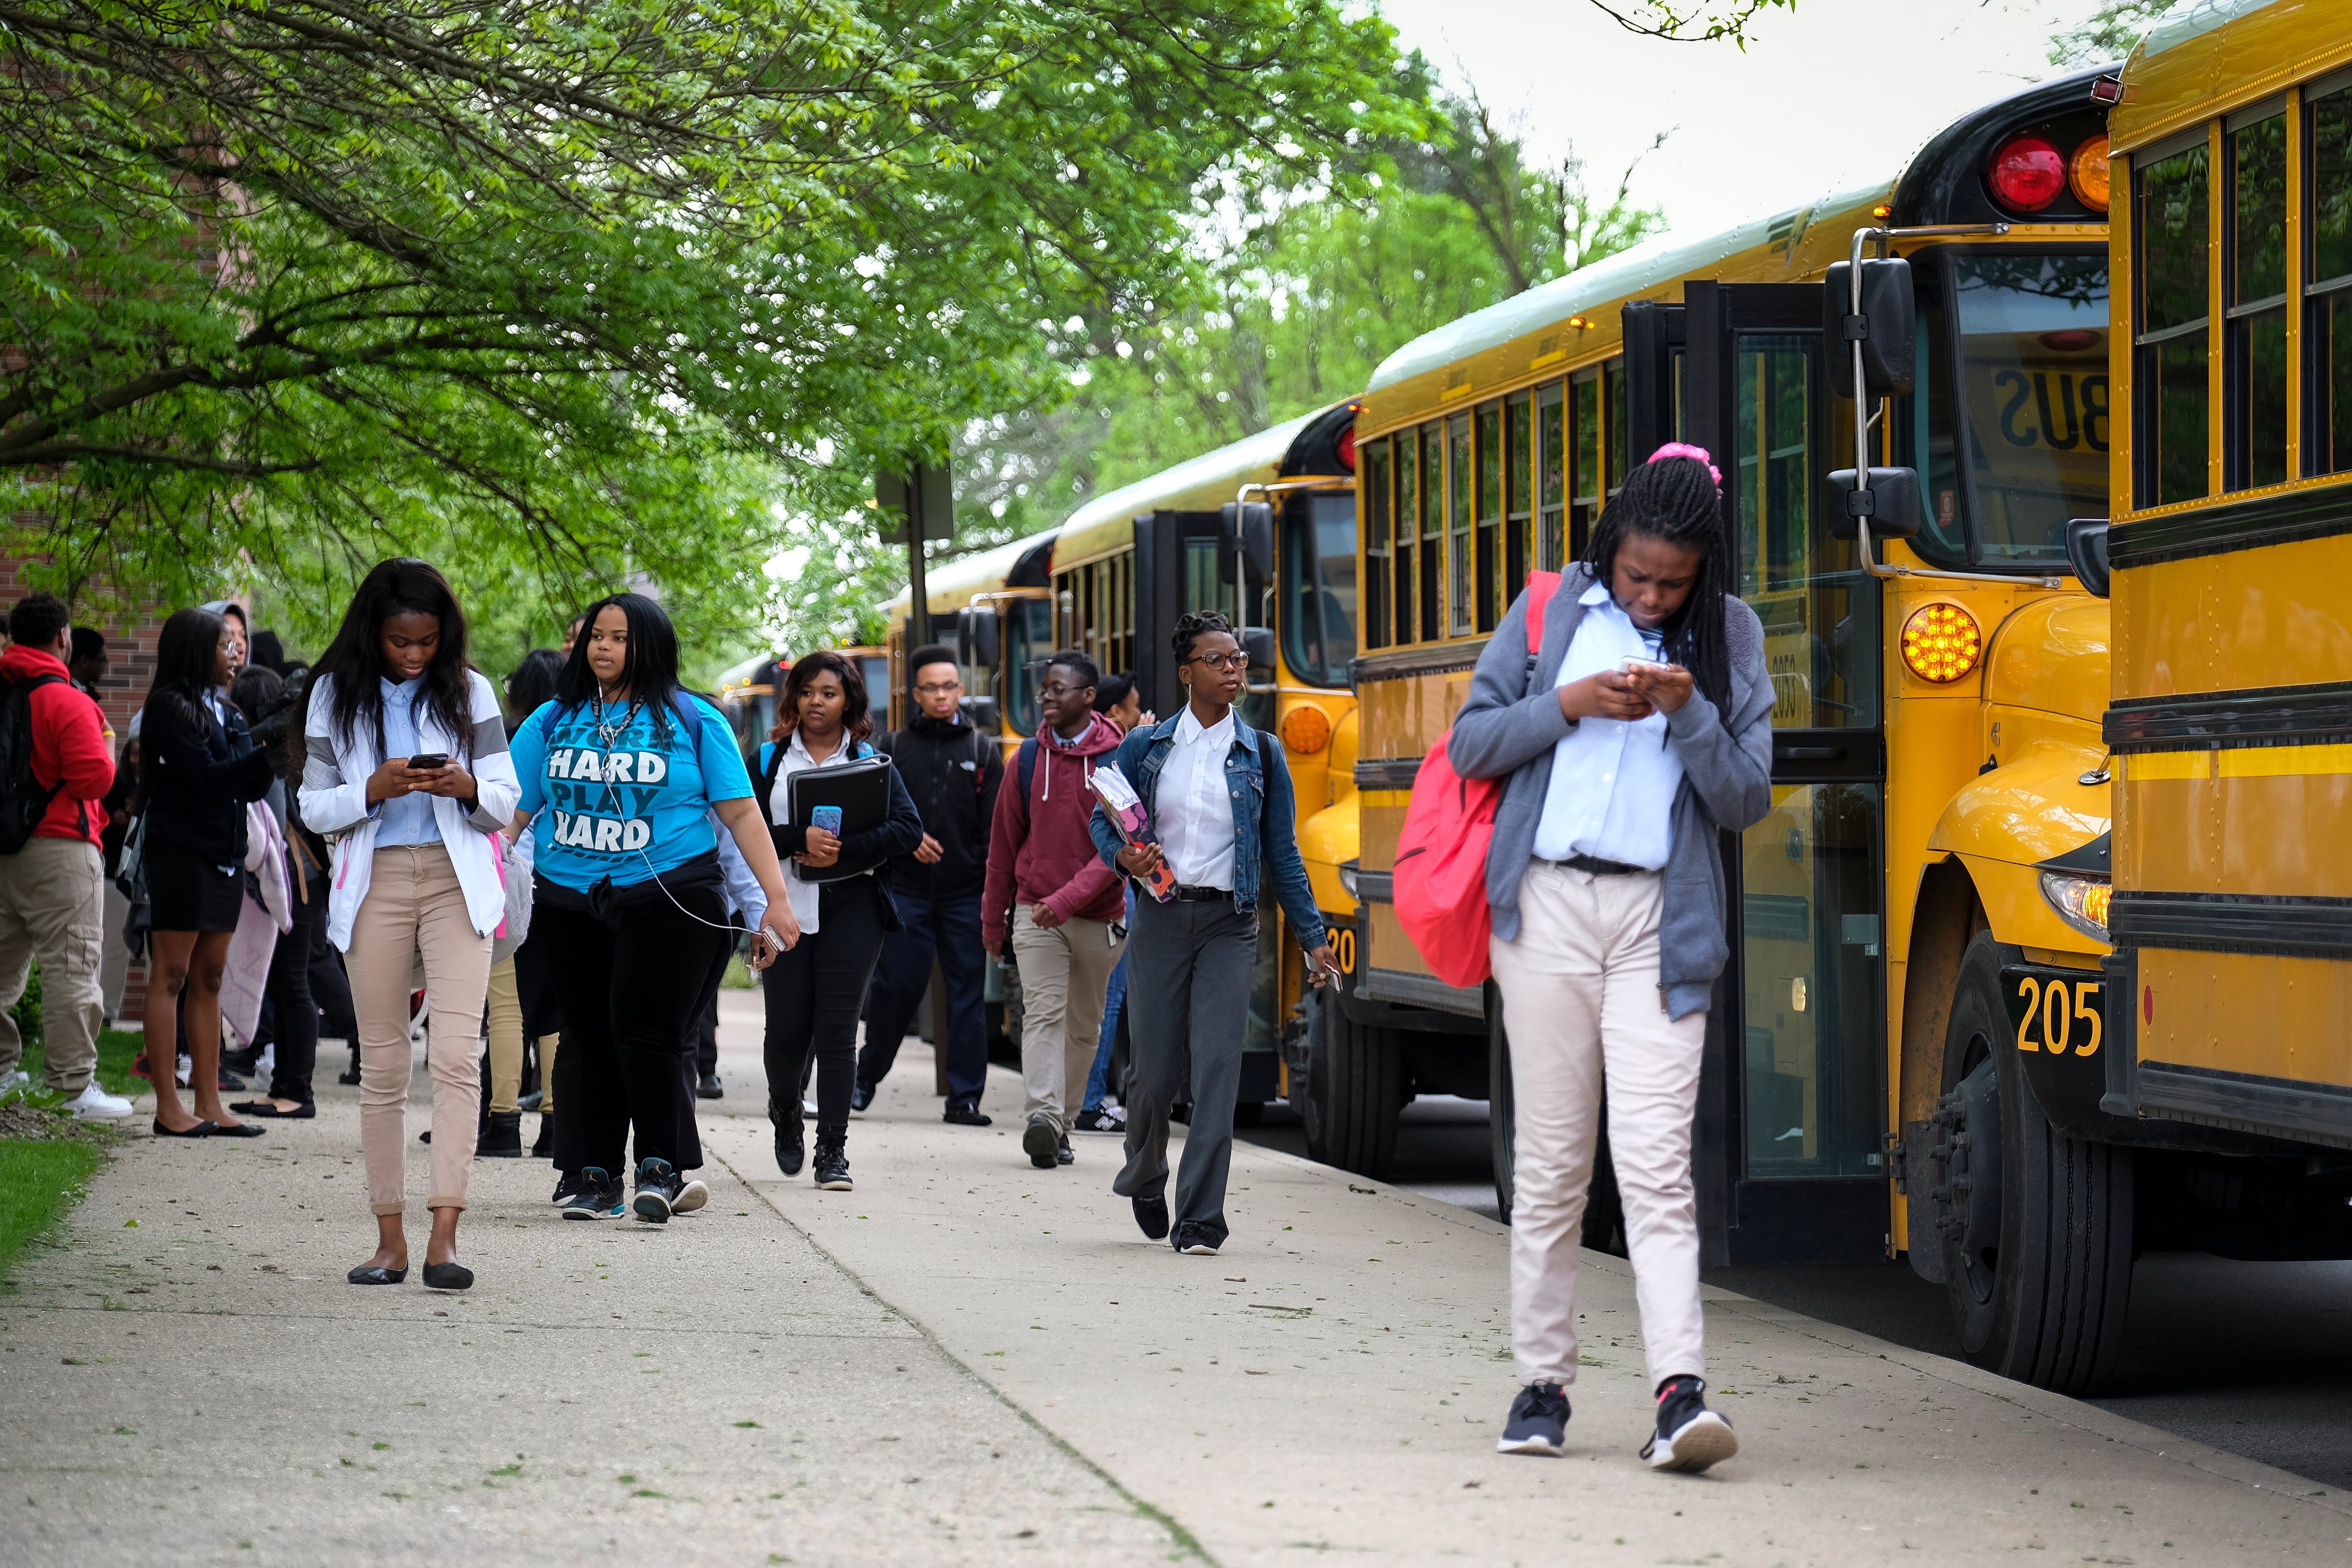 Students walk by a couple of yellow and black school busses with green trees in the background.